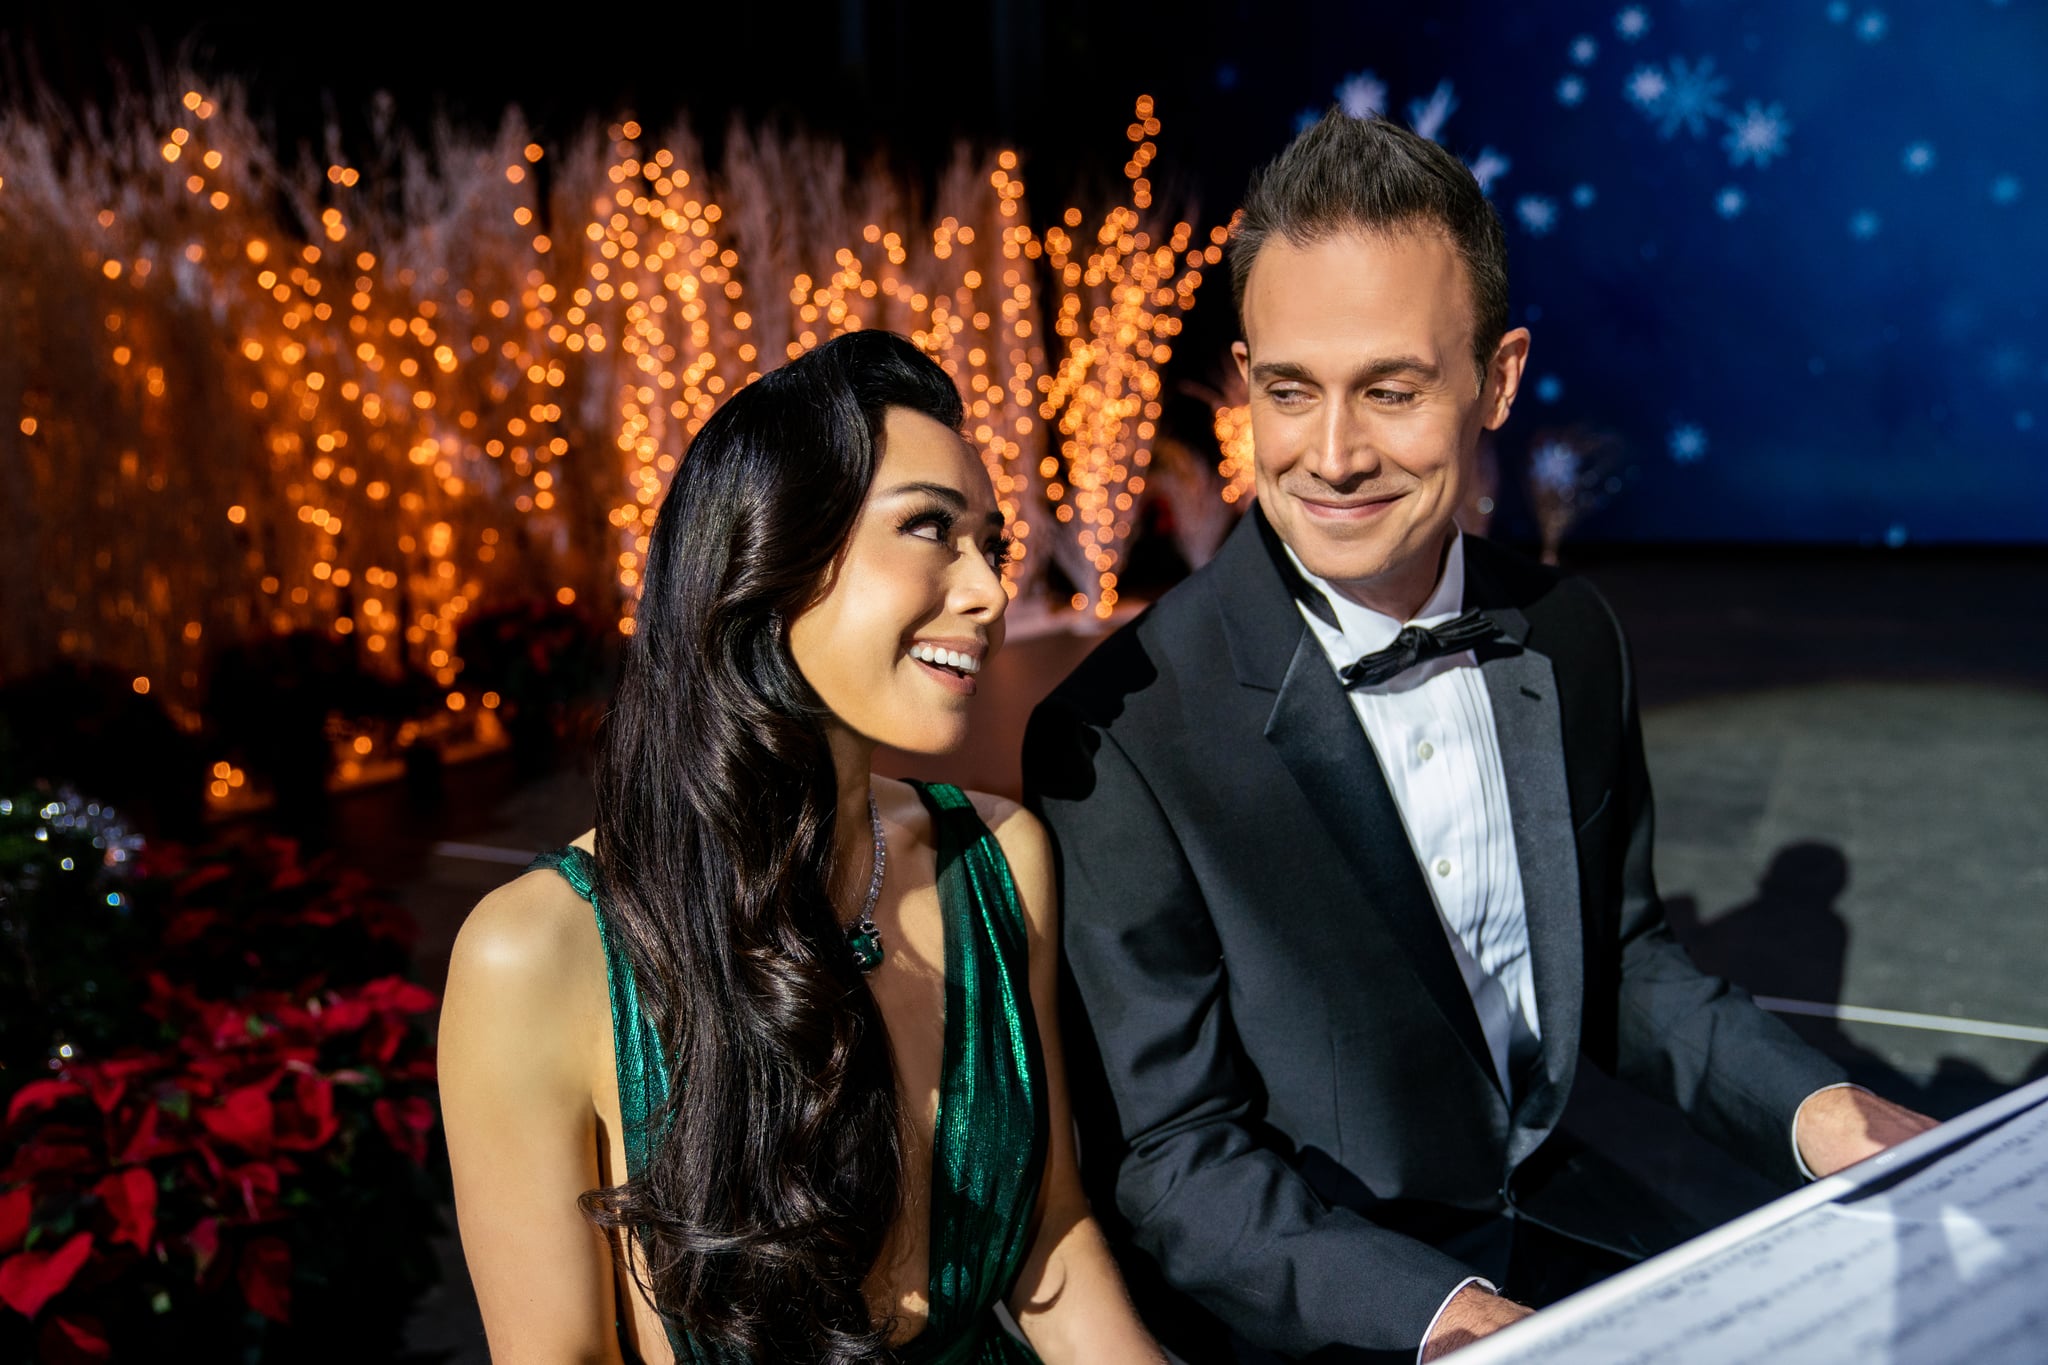 Christmas with you  (L to R) Aimee Garcia as Angelina, Freddie Prinze Jr. as Miguel in Christmas With You.  Kr. Jessica Kourkounis/Netflix © 2022.